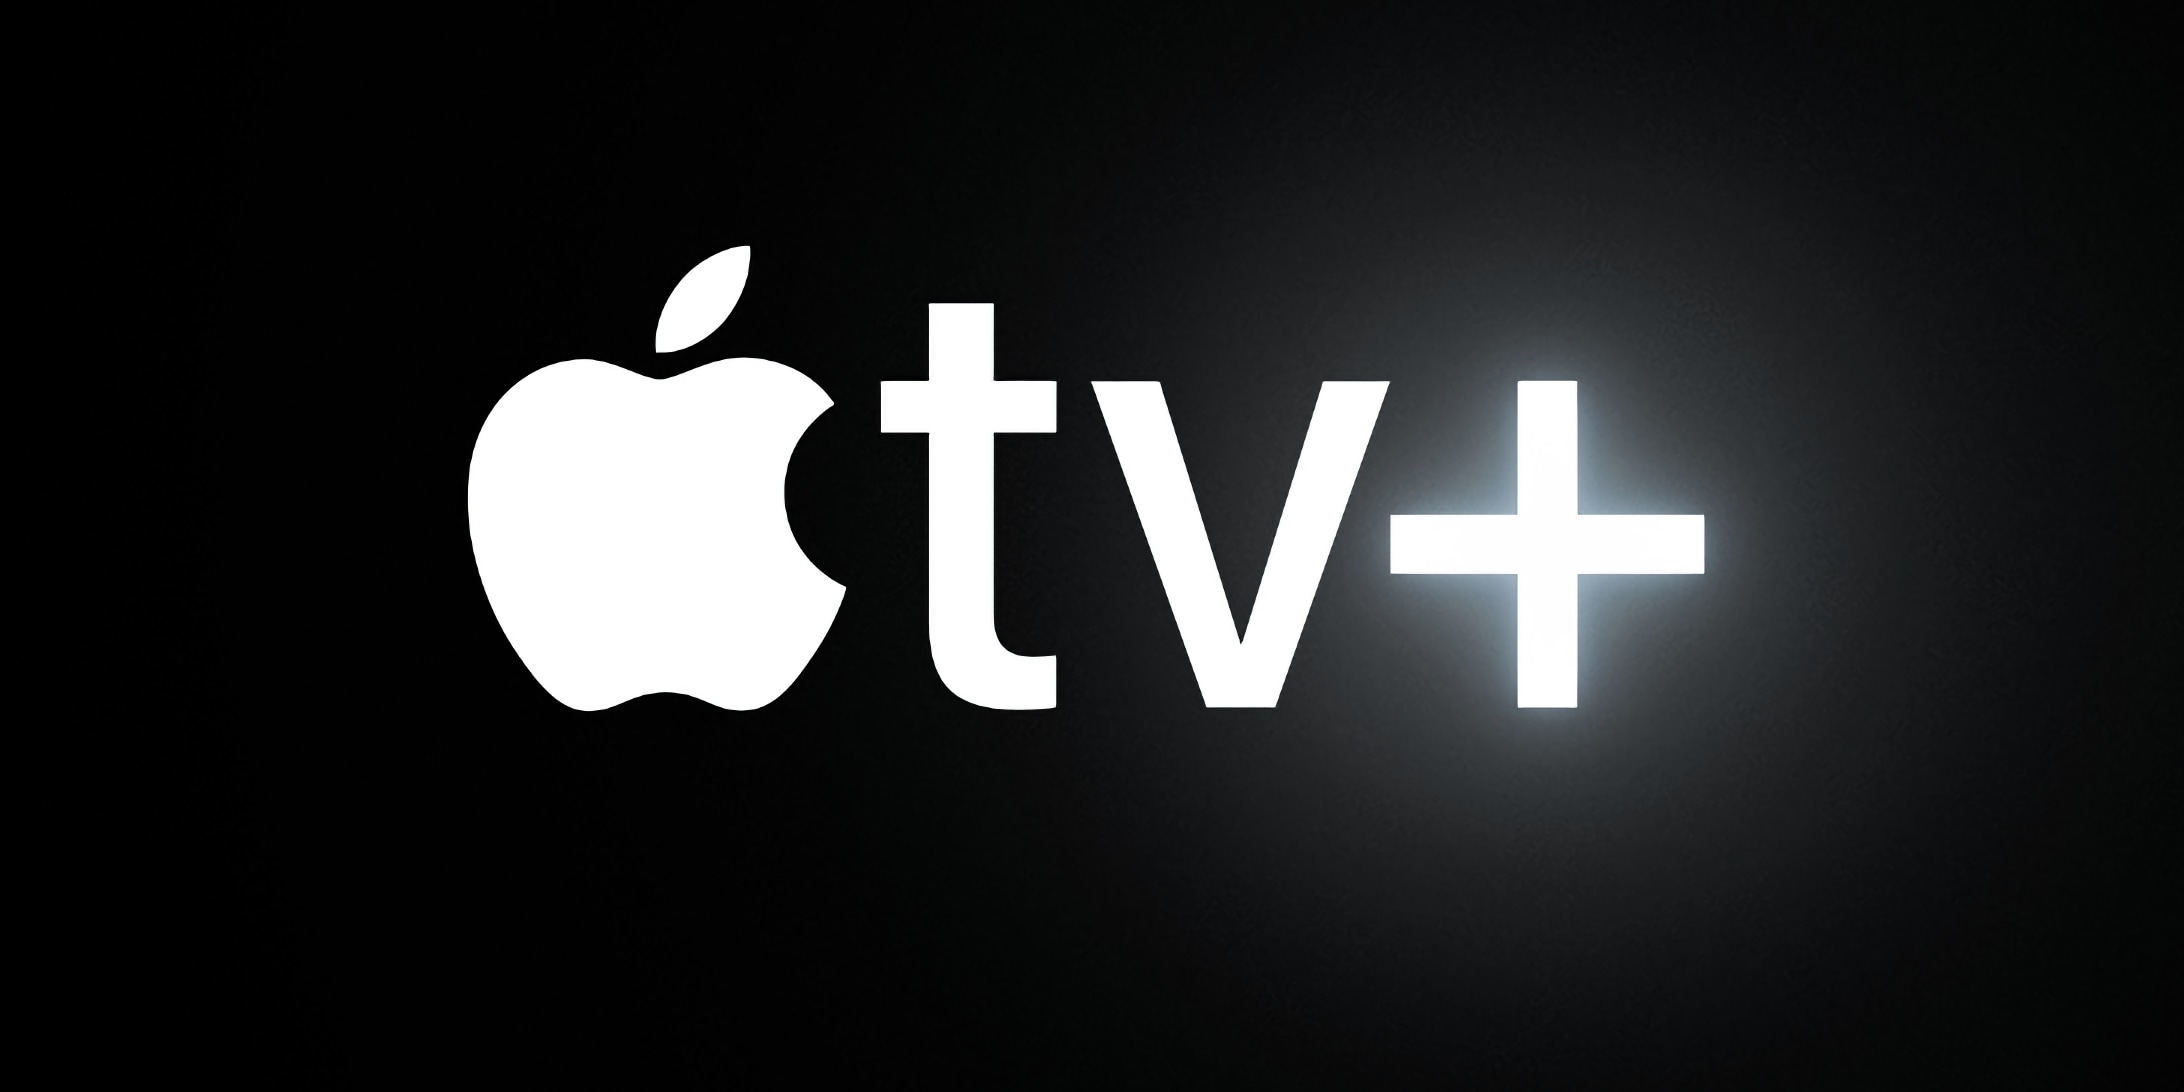 Apple rumored to launch ad-supported TV+ tier next year